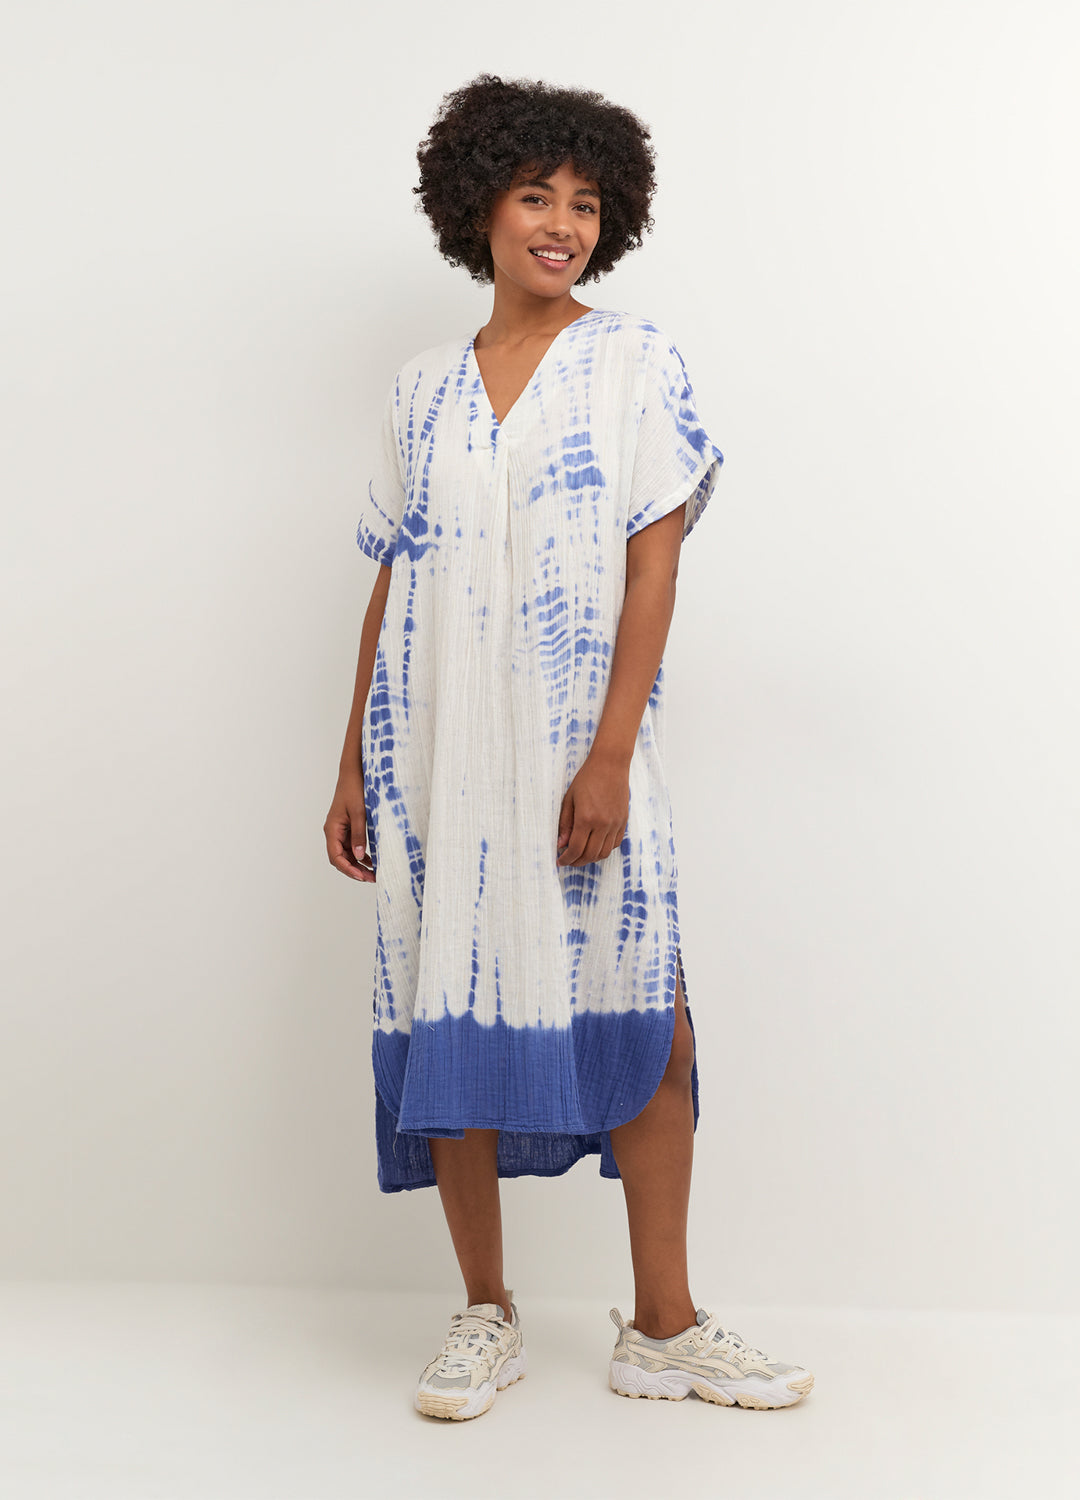 Culture Clothing Denmark Birtine Kaftan Dress in Ultramarine colour made from cotton available at Inner Beach, Toronto, Ontario, Canada